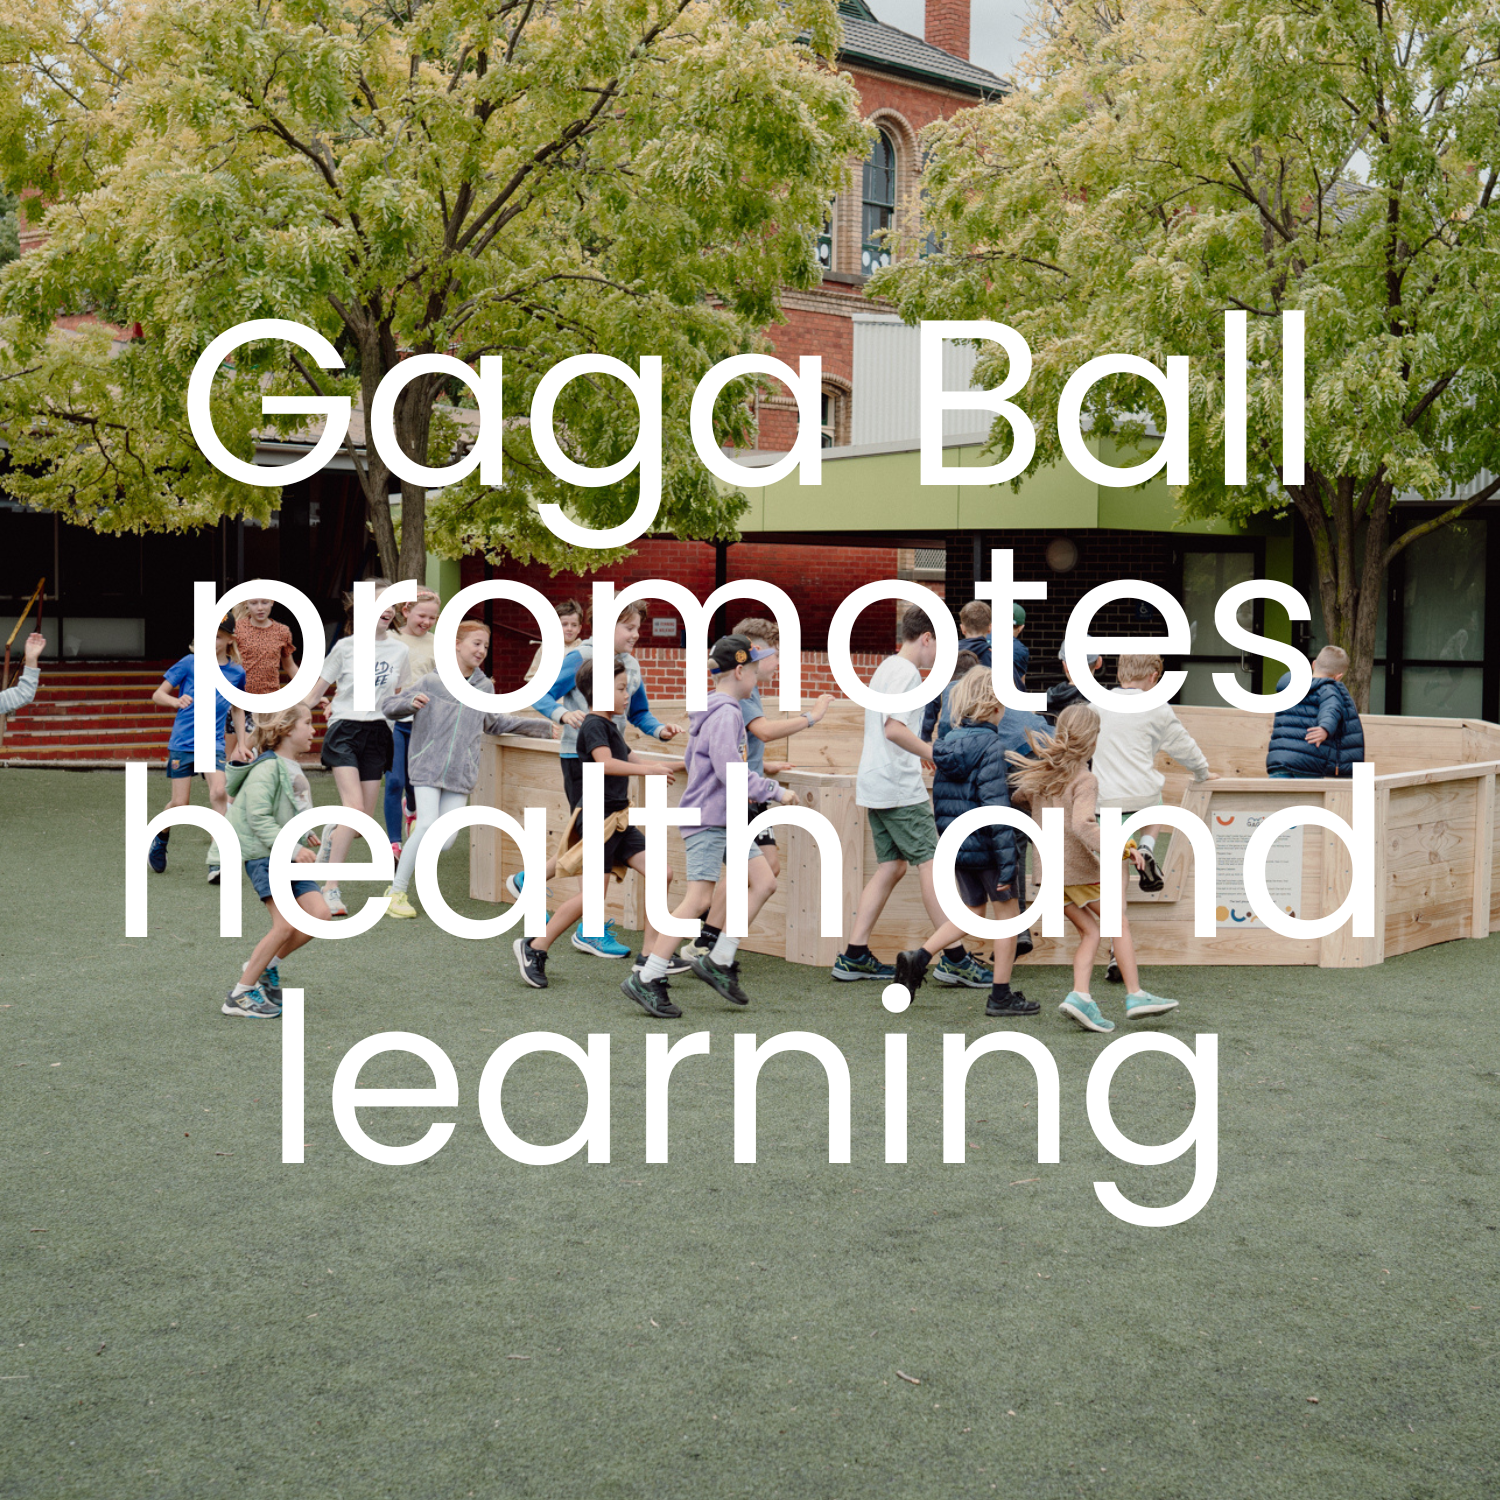 Promoting Health and Learning through Gaga Ball